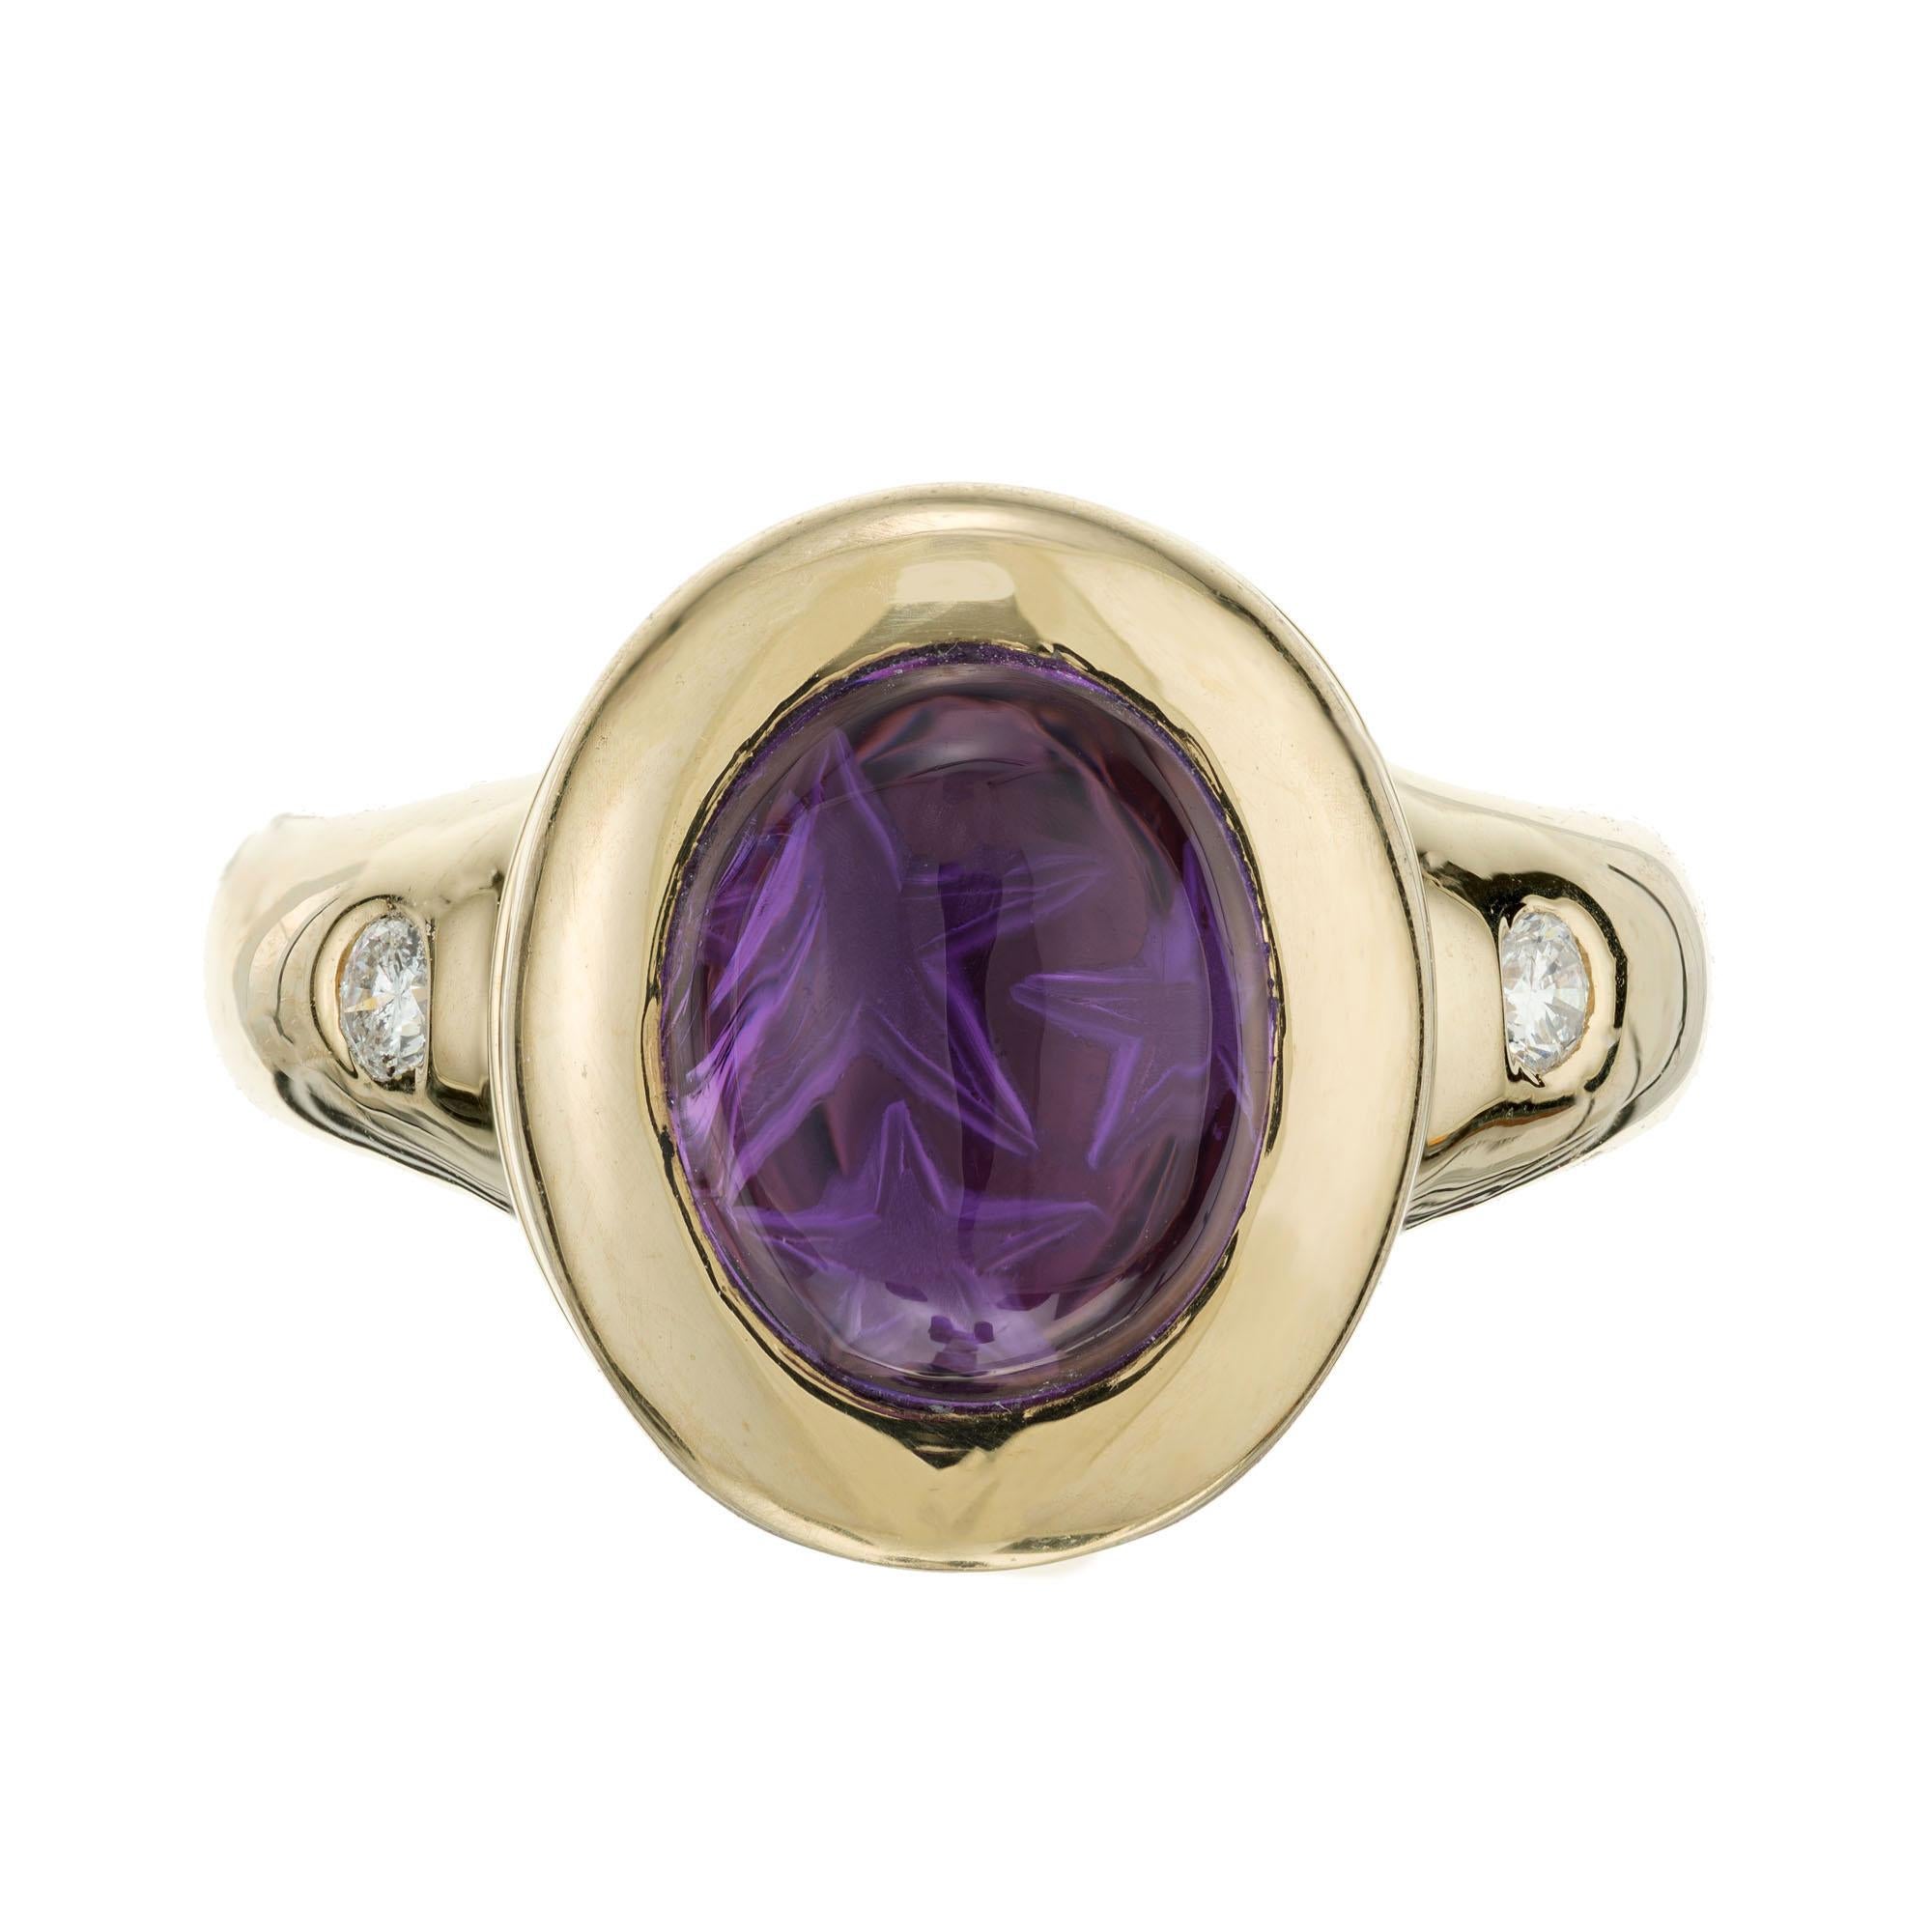 Amethyst and diamond ring. 1 oval cabochon amethyst set in 14k yellow gold with 2 round brilliant cut diamonds. Crown of ring opens up.  

1 oval cut cabochon purple amethyst, VS 10.5mm x 8.5mm
2 round brilliant cut diamond, G SI2 approx.